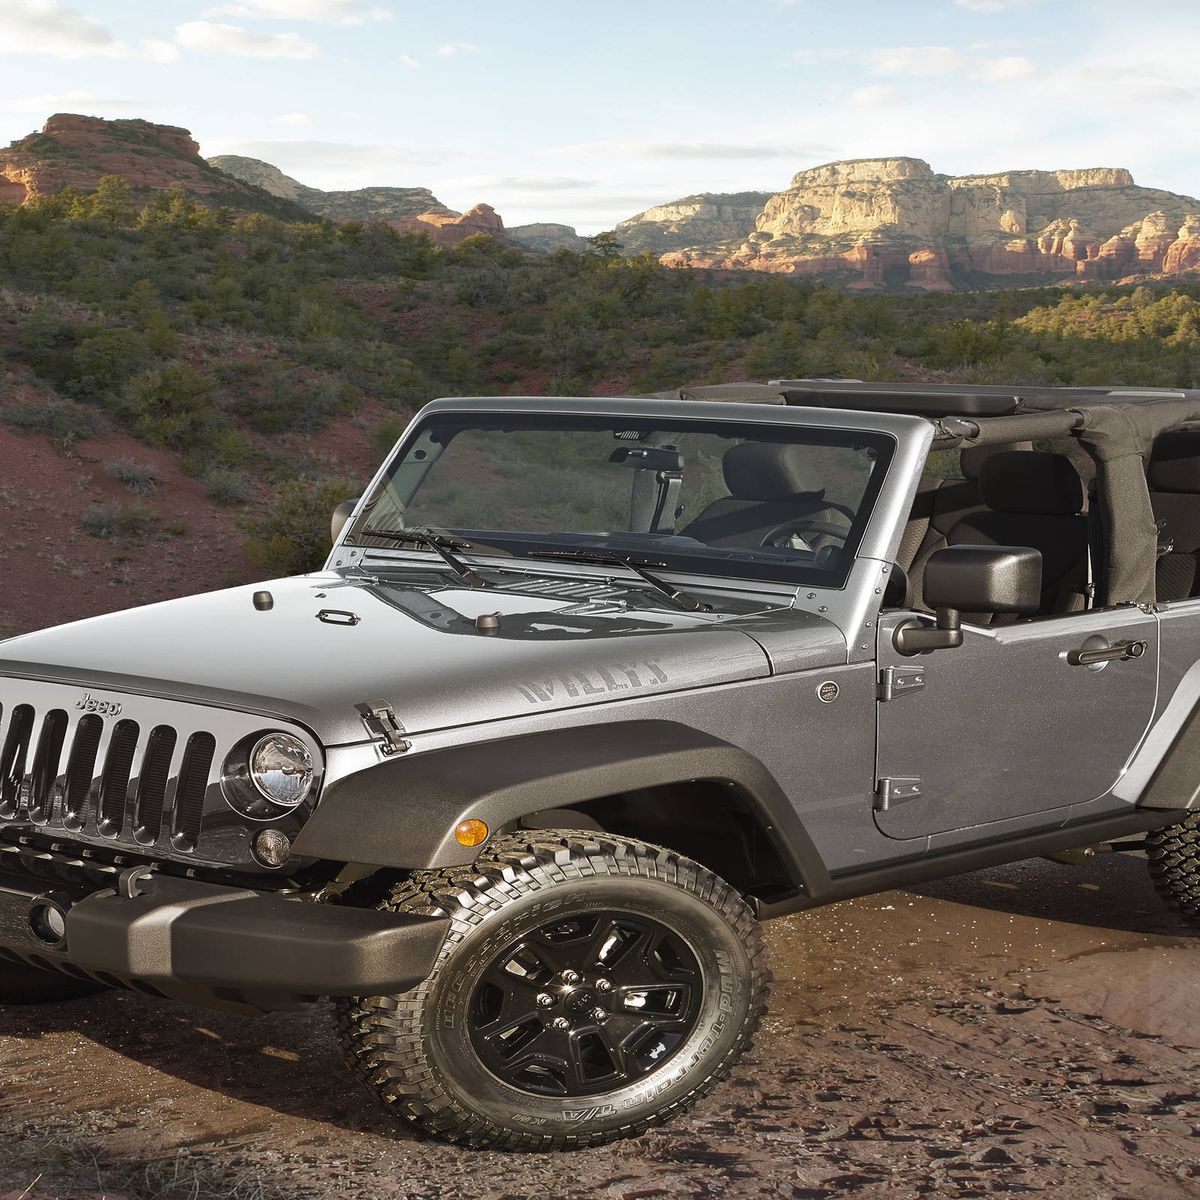 2018 Jeep Wrangler to get eight-speed automatic